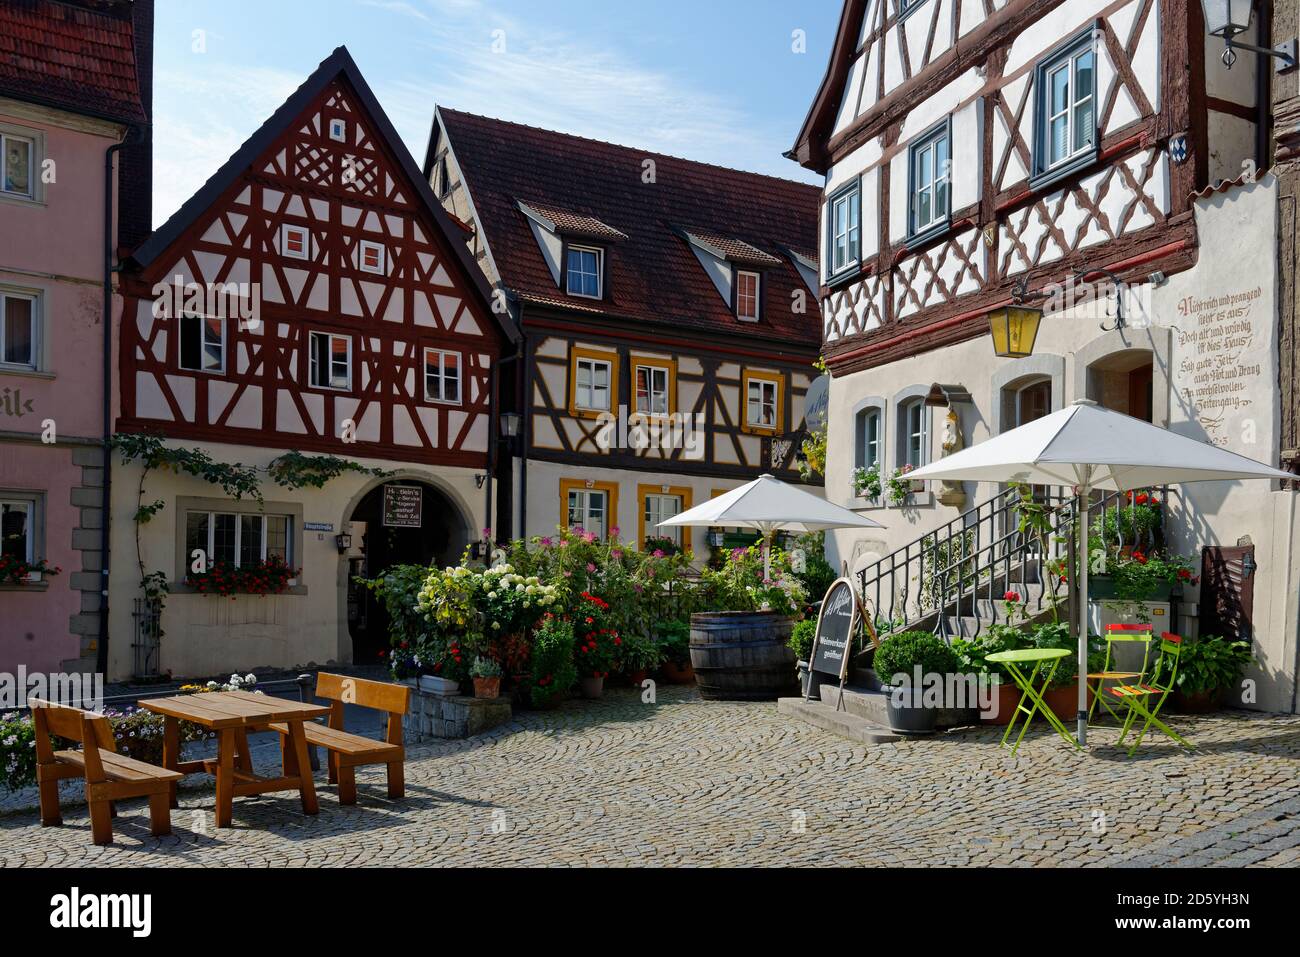 Germany, Zeil am Main, half-timbered houses at market square Stock Photo